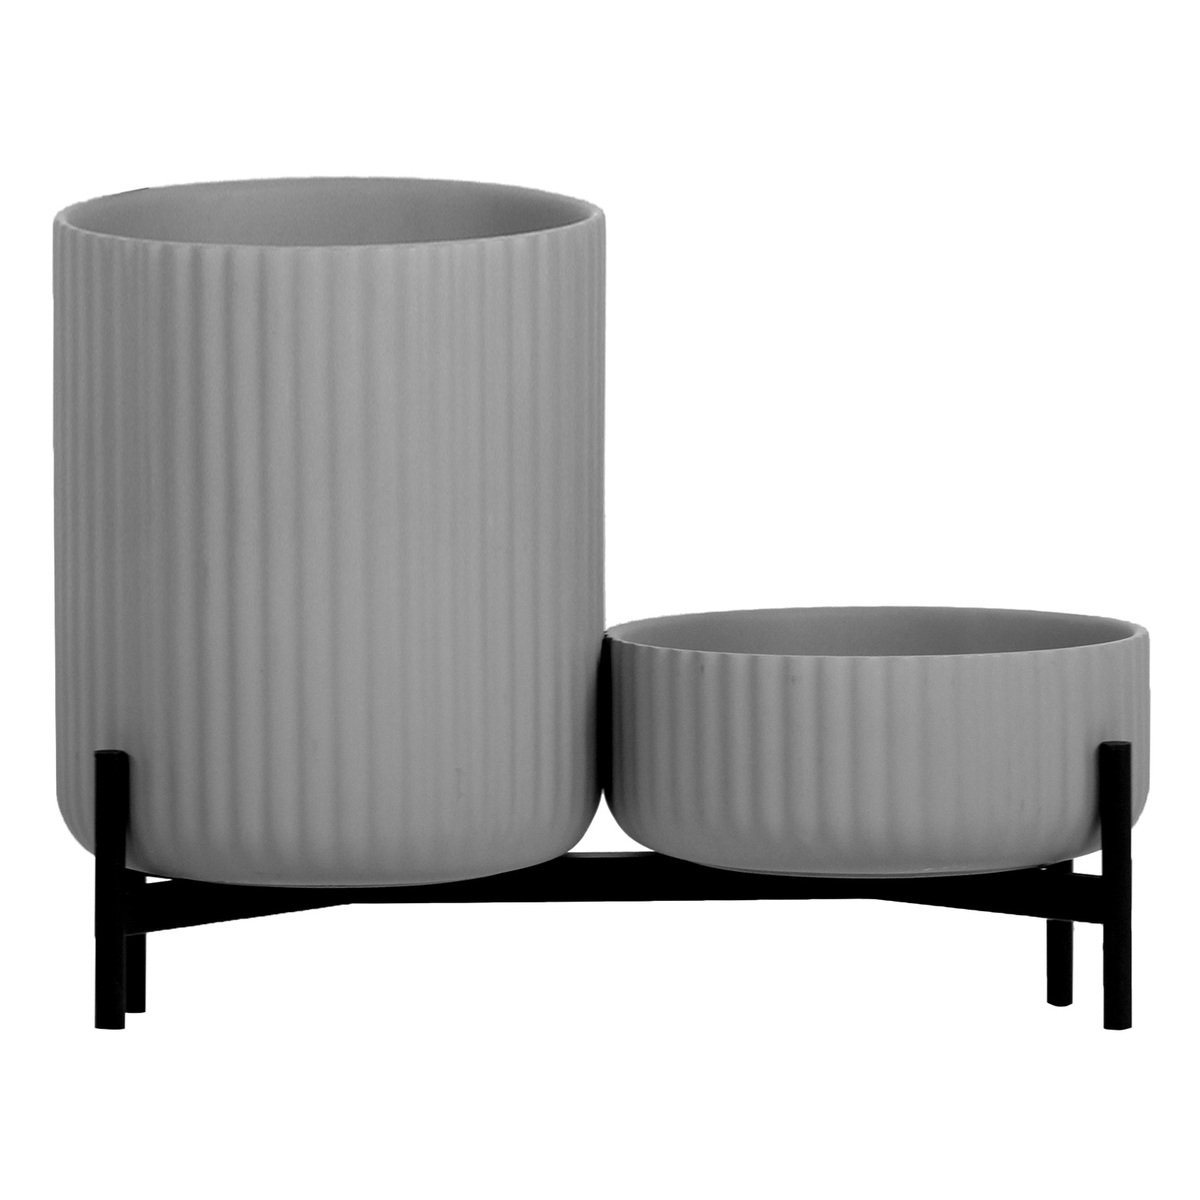 Shop NL low Finnish planter with | Elementa Design grey high, and stand, Klorofyll